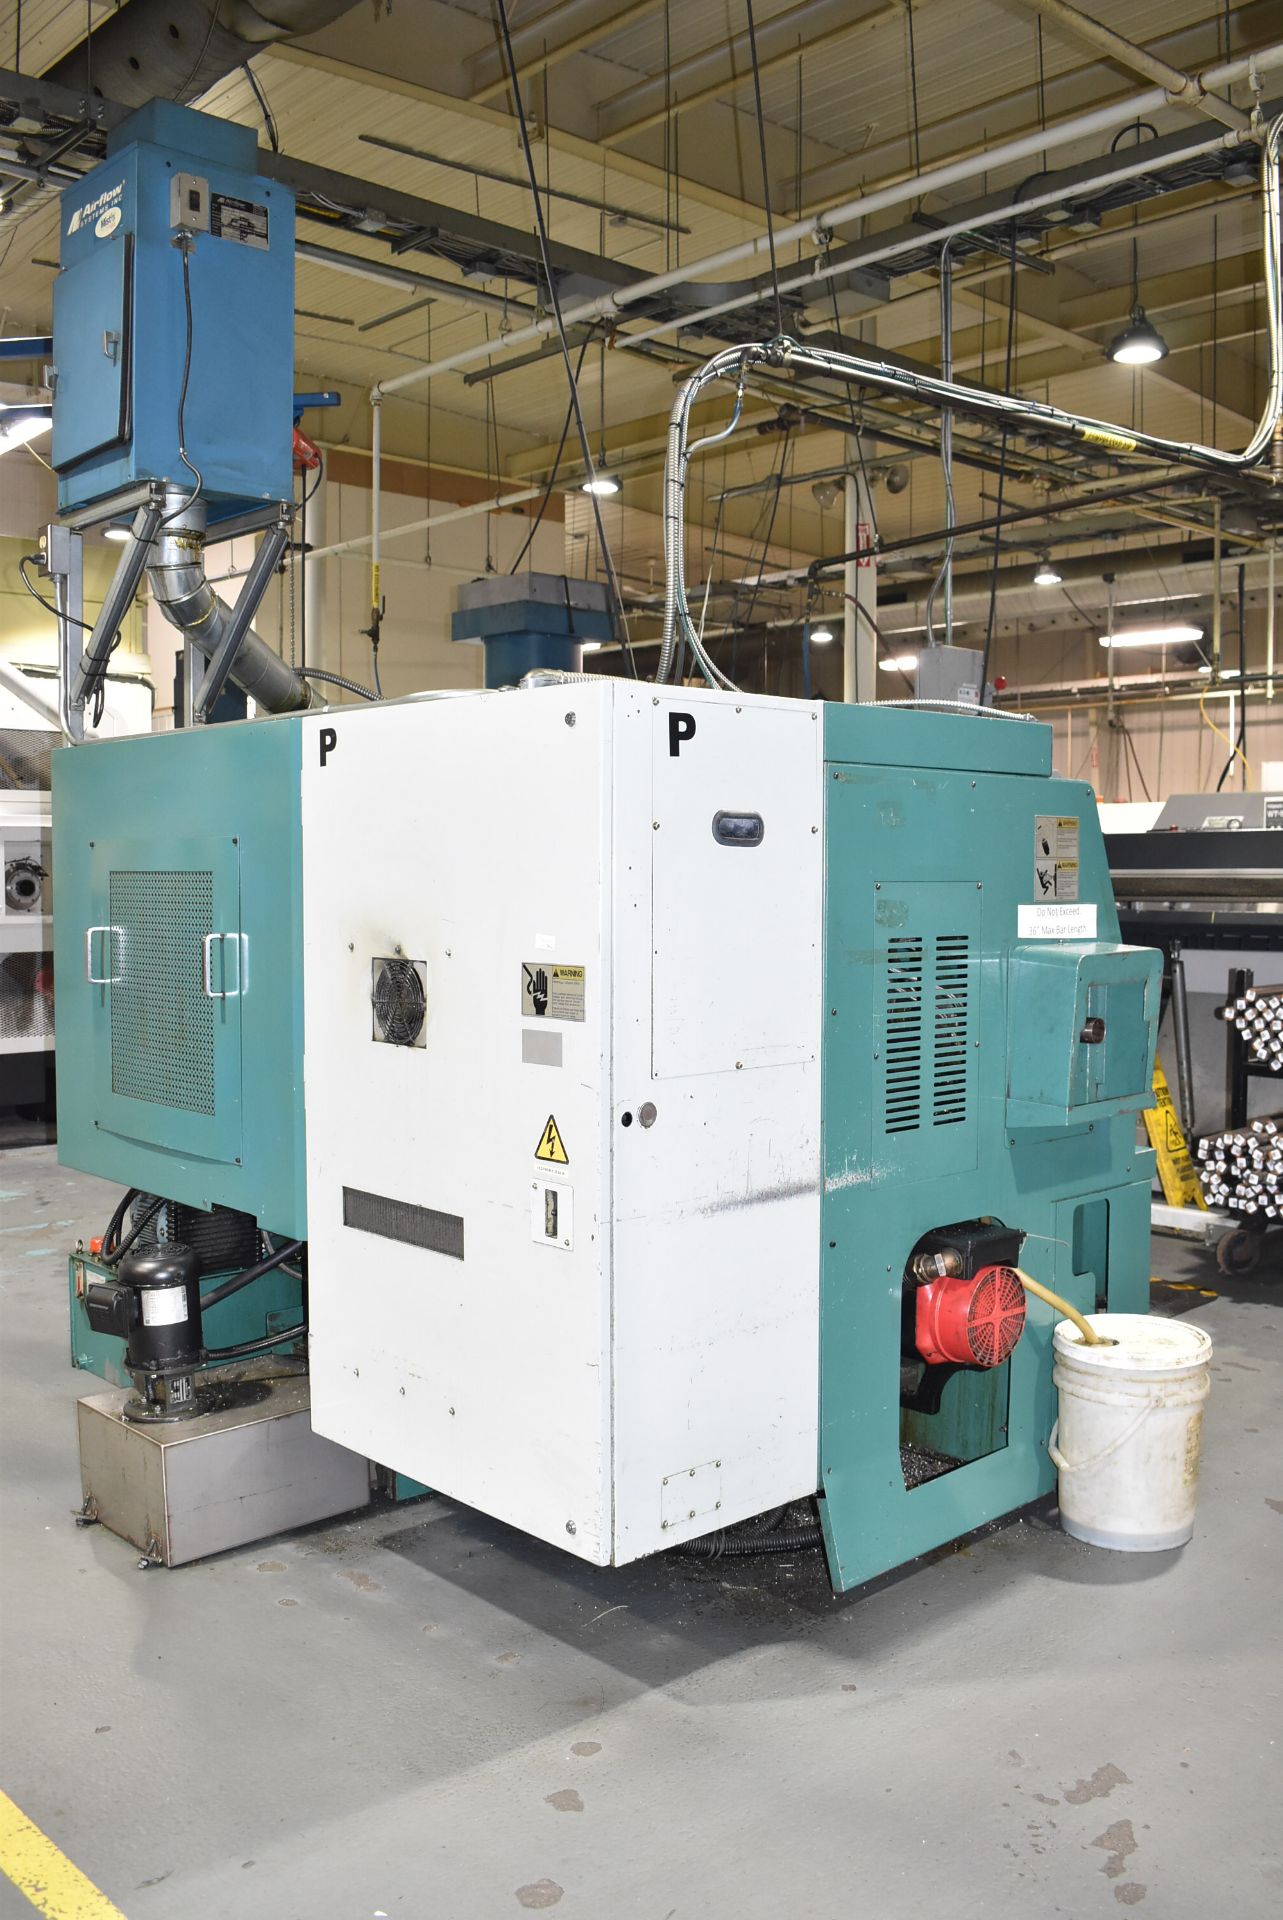 NAKAMURA-TOME SC-150 OPPOSED-SPINDLE CNC TURNING CENTER WITH FANUC SERIES 18I-T CNC CONTROL, 8" MAIN - Image 11 of 13